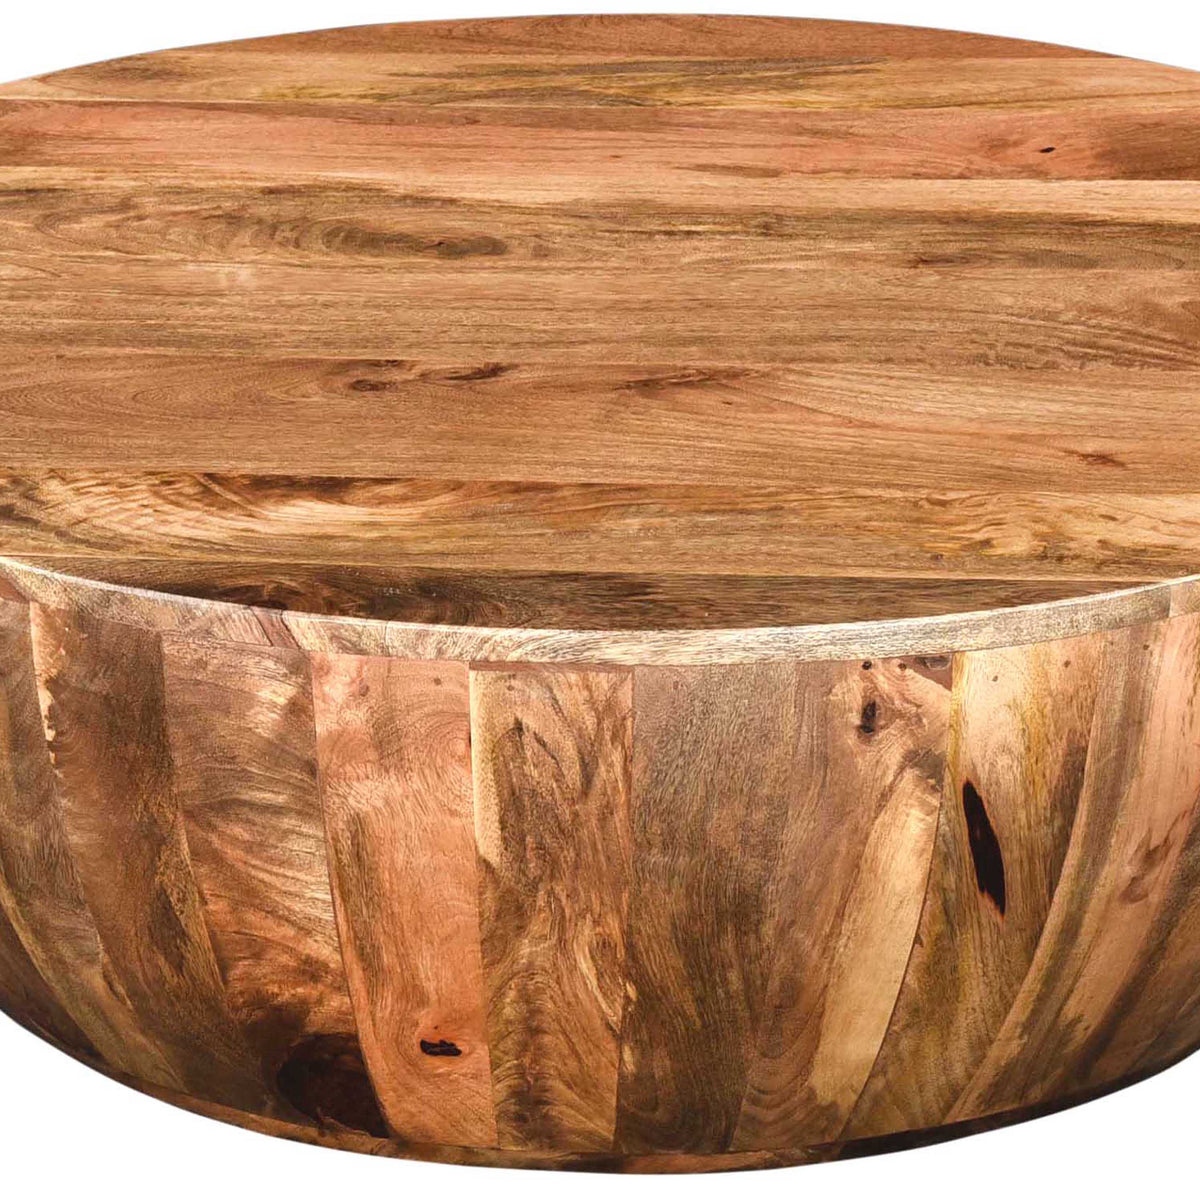 Mango Wood Coffee Table In Round Shape